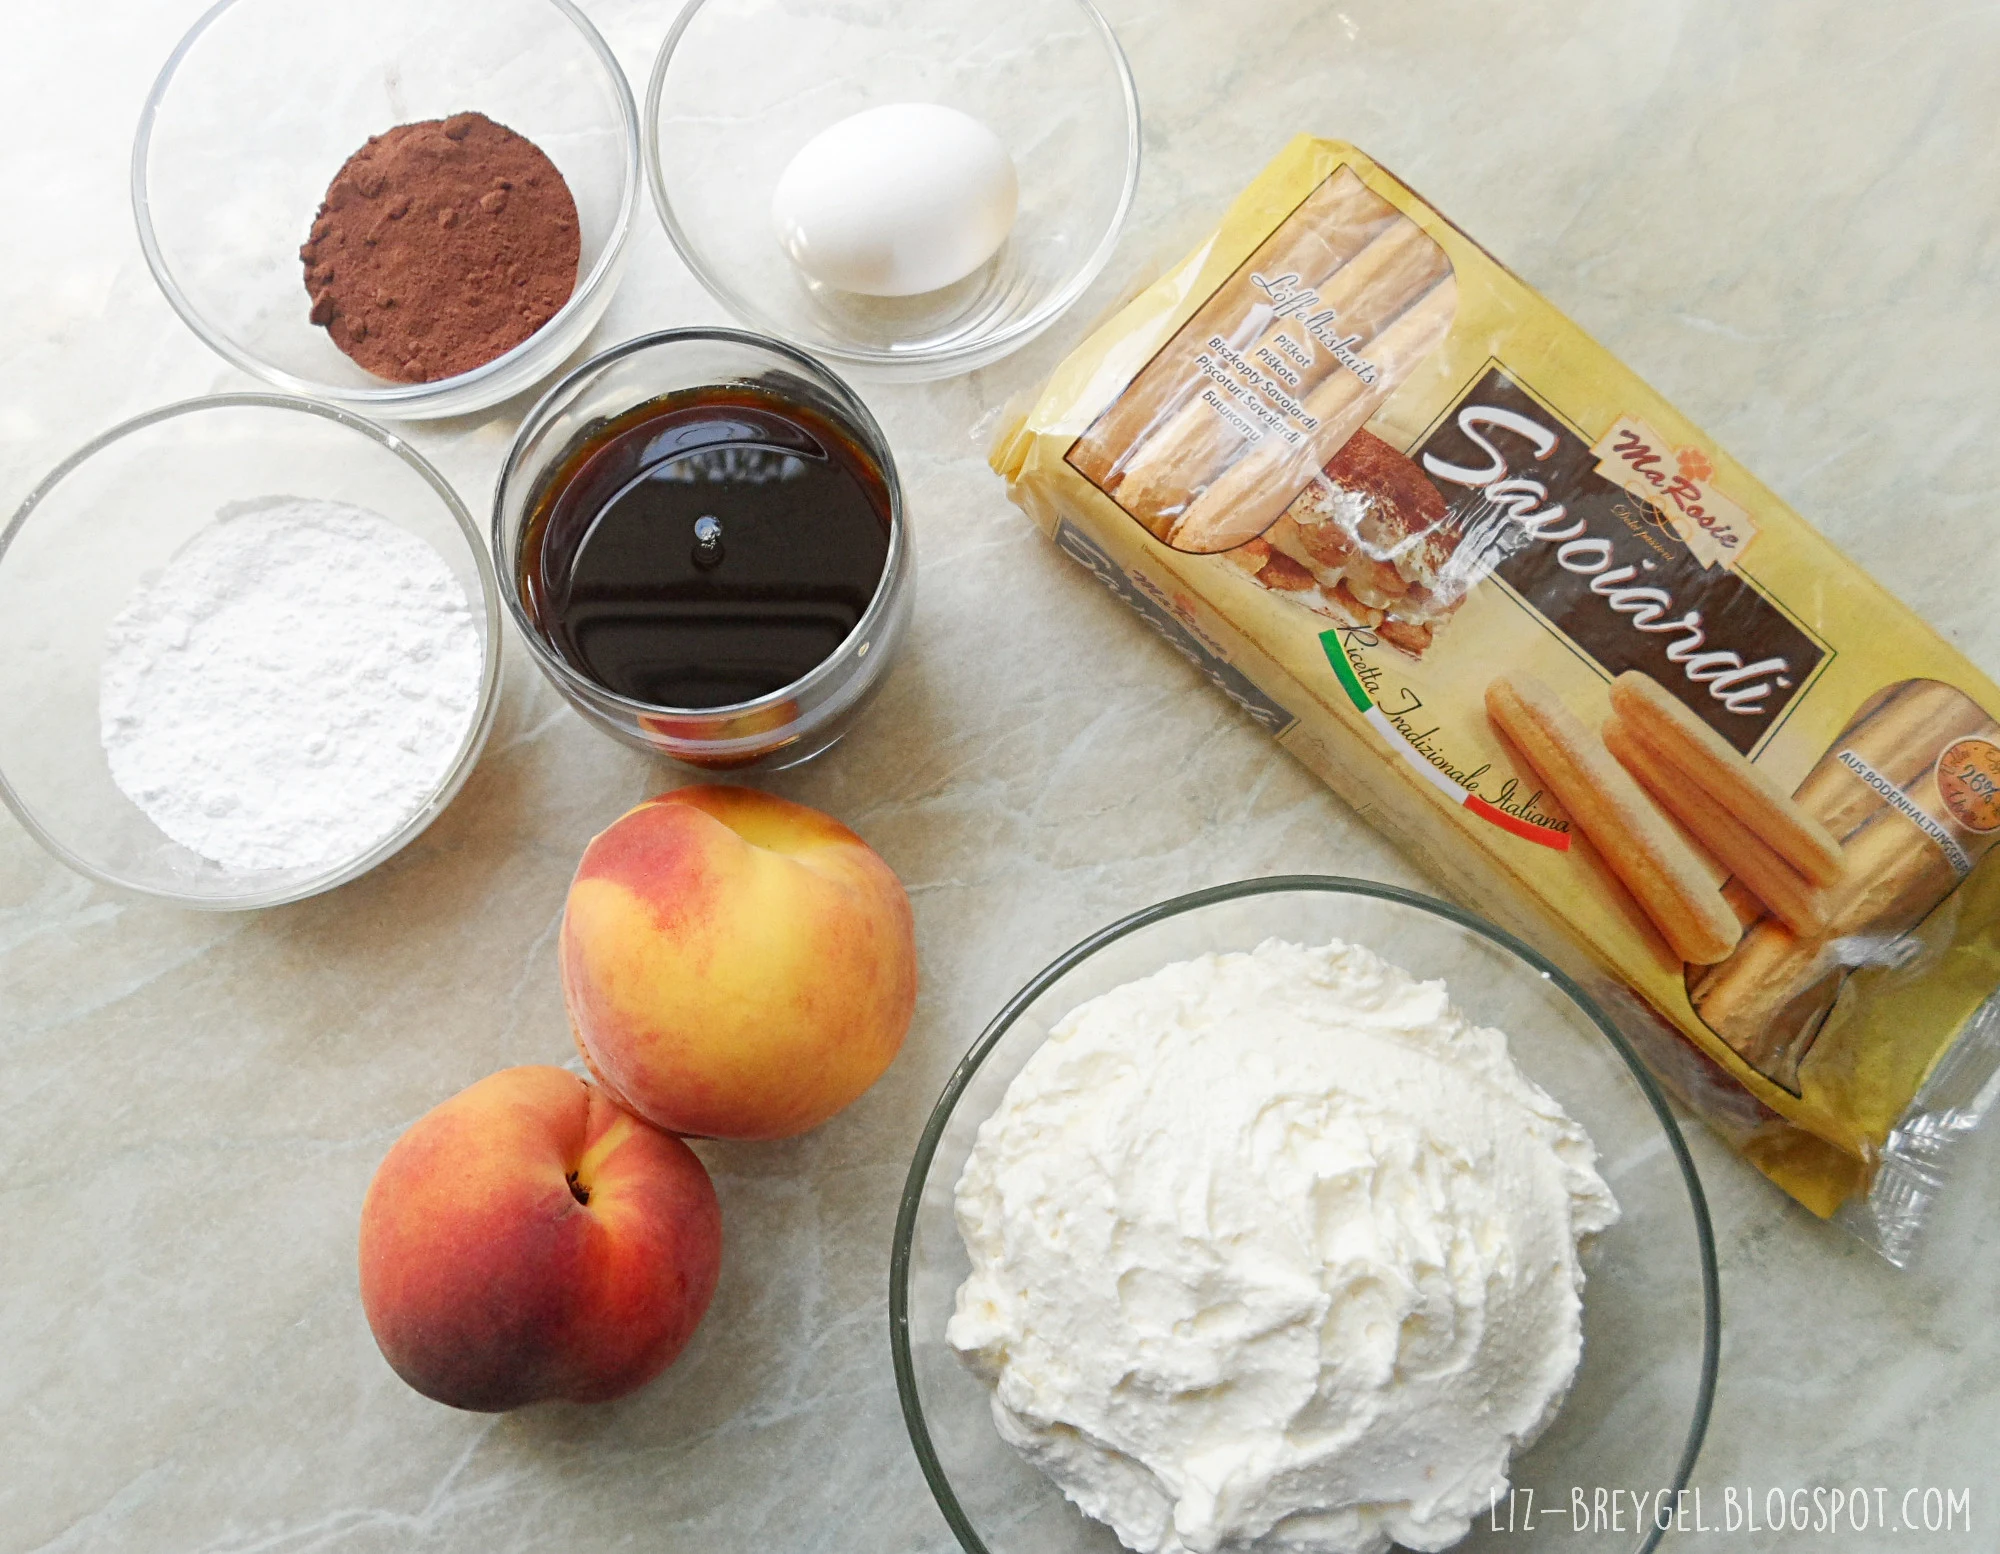 beauty and lifestyle blogger Liz Breygel share pictures and step-by-step recipe on how to prepare a jumbo peach tiramisu dessert for summer